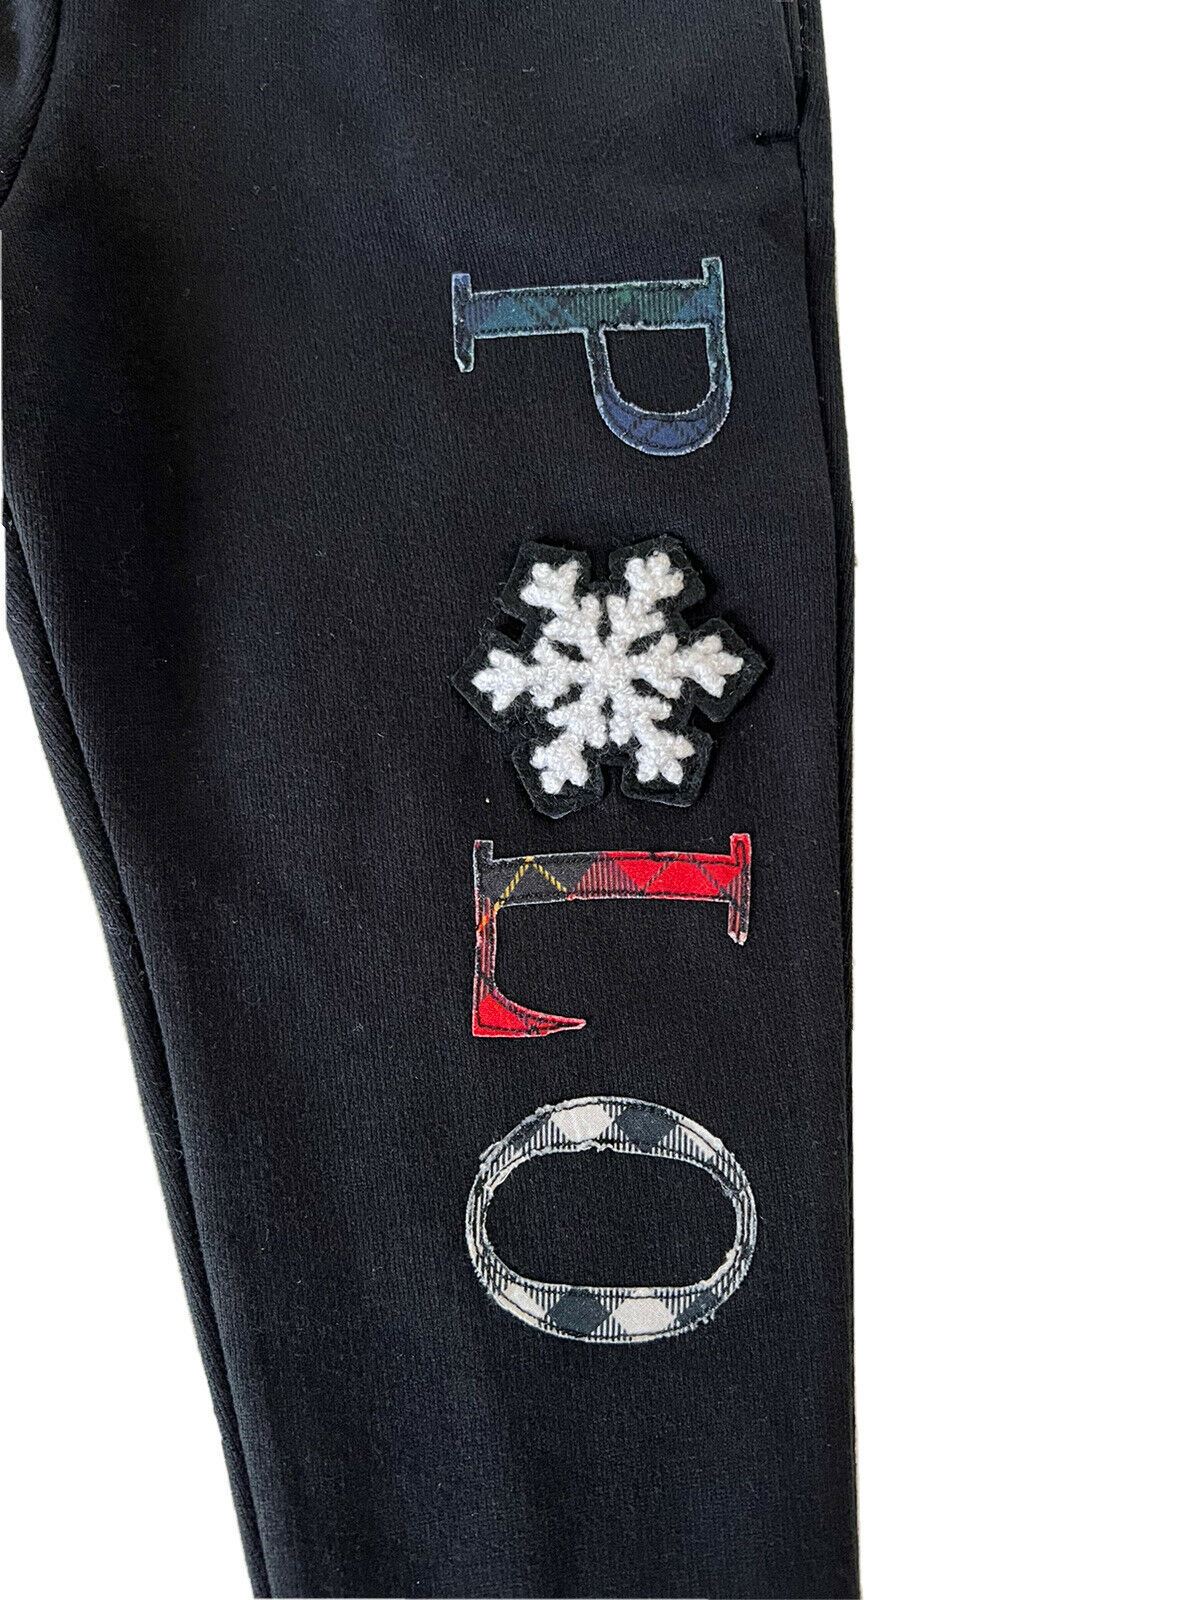 NWT Polo Ralph Lauren Boy's Black Snow Flake Casual Pant 4 Made in India